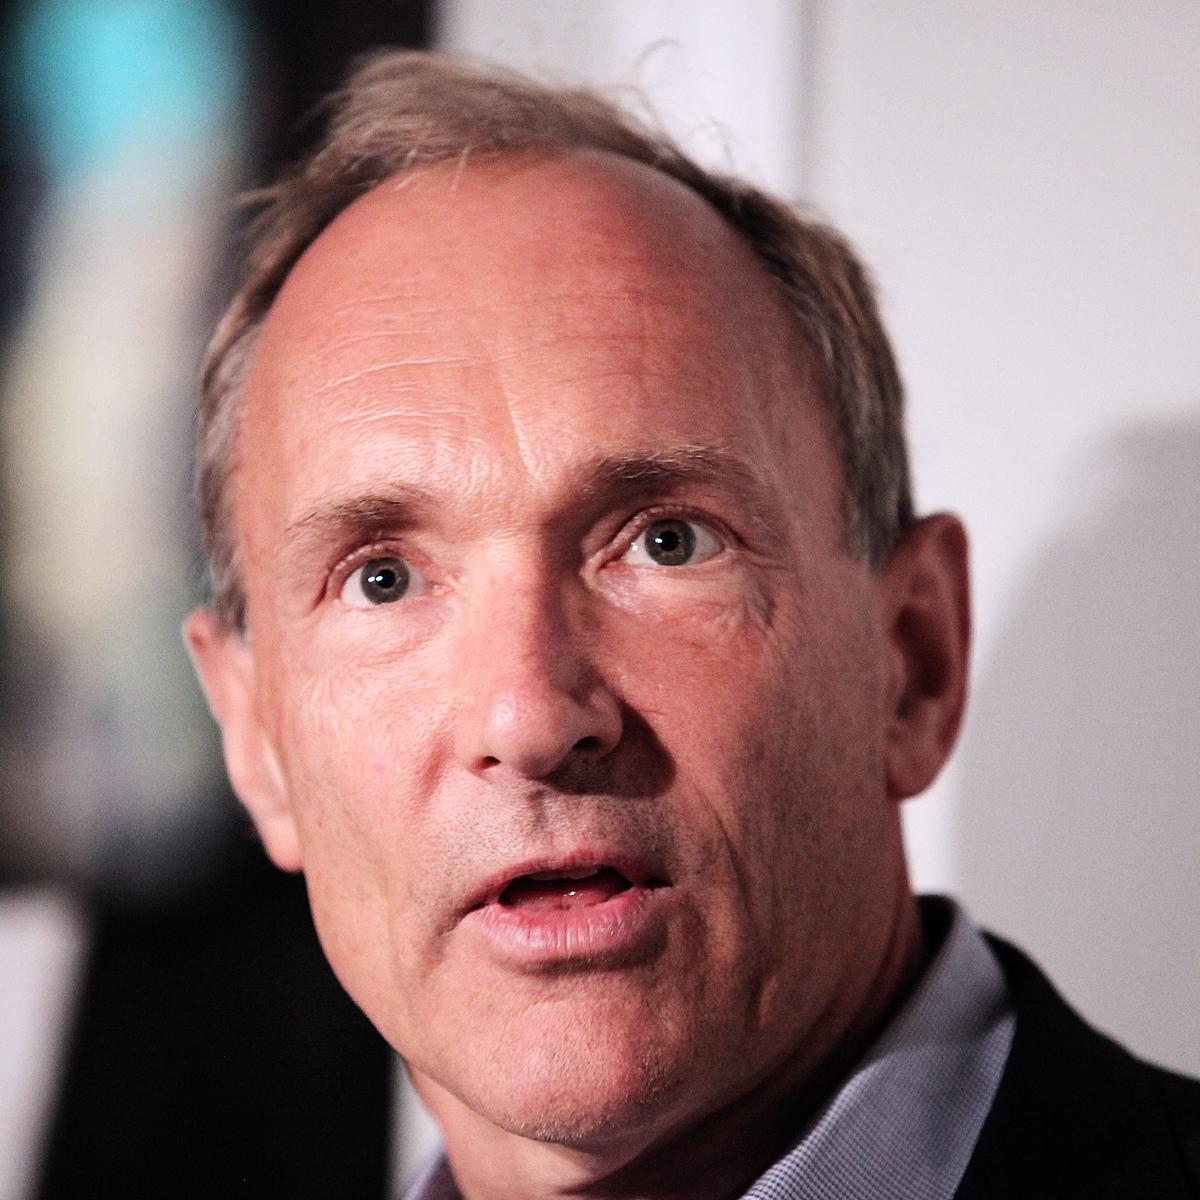 Photograph of Sir Tim Berners-Lee for client Sapient Nitro by professional photographer Julian Hanford